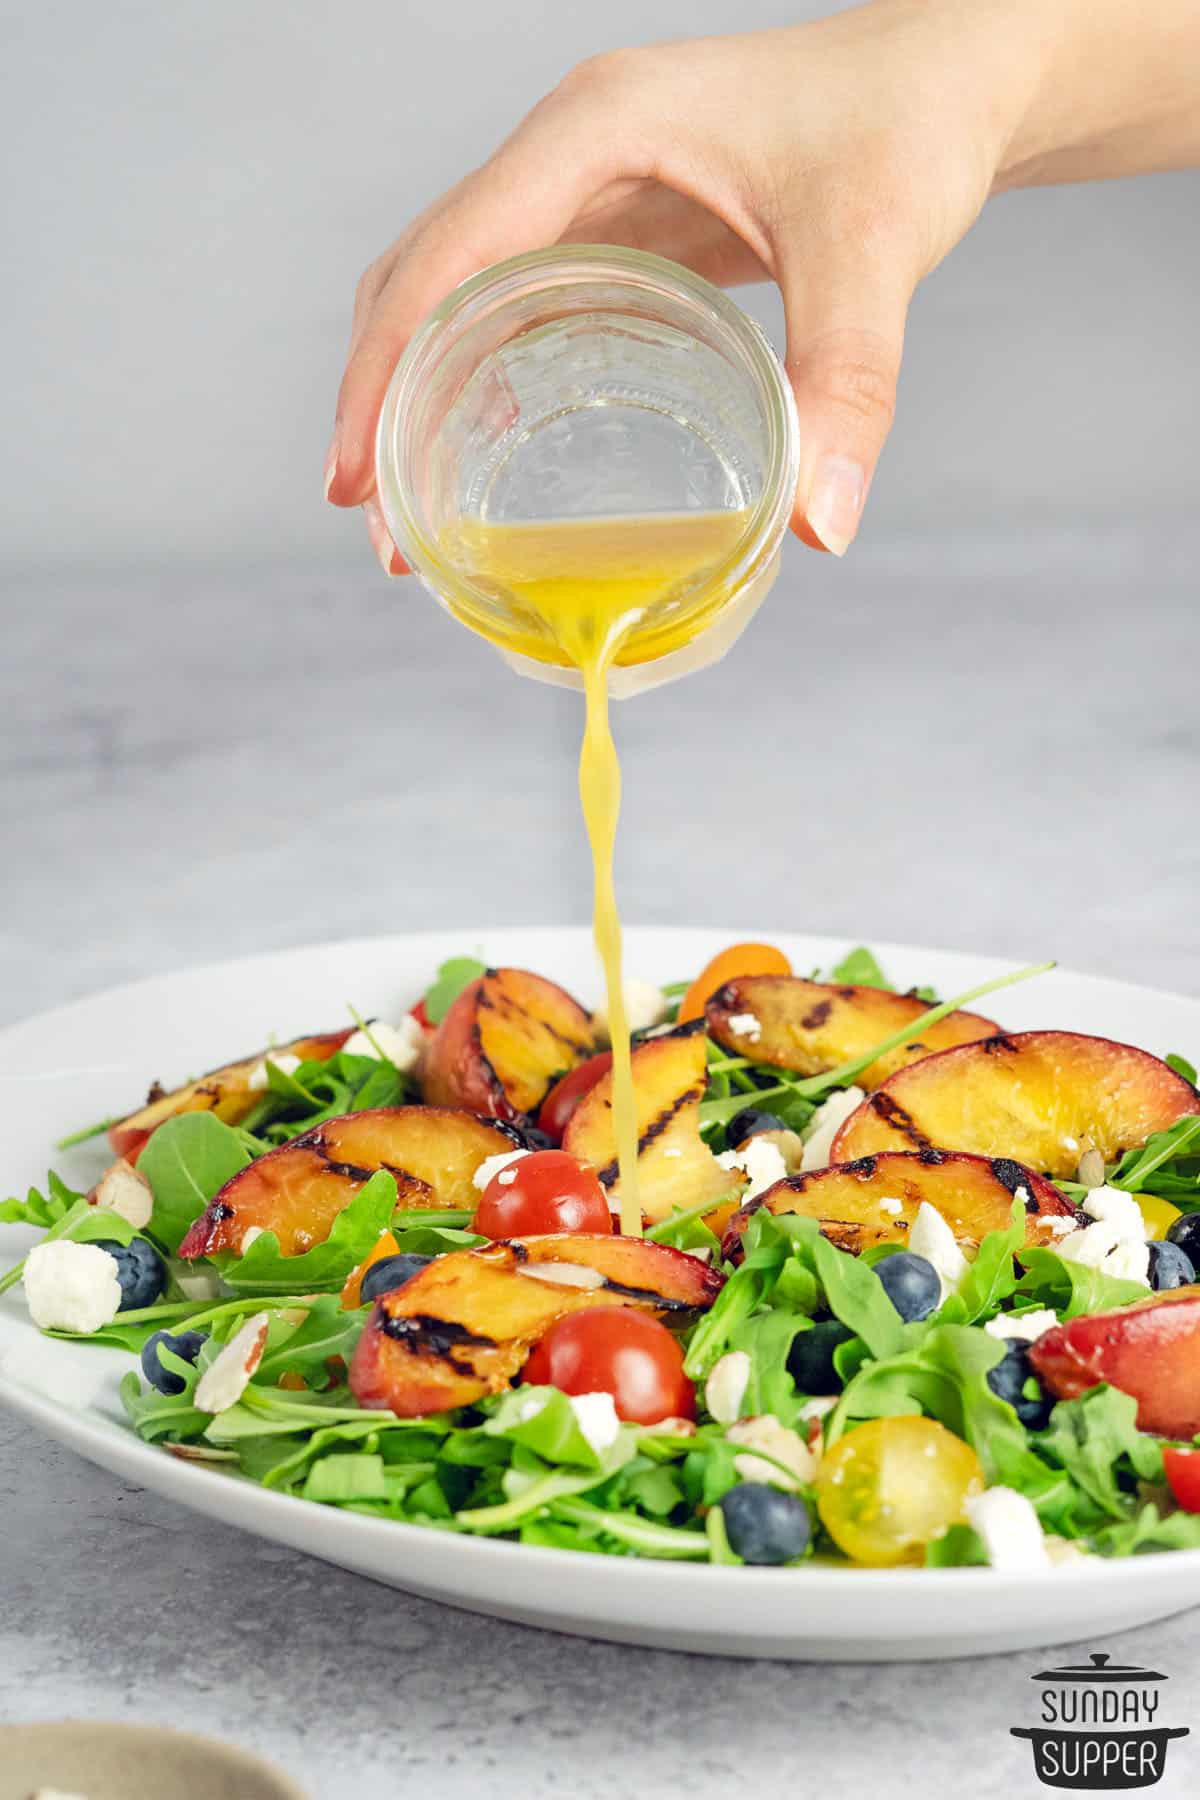 pouring dressing on a grilled peach salad